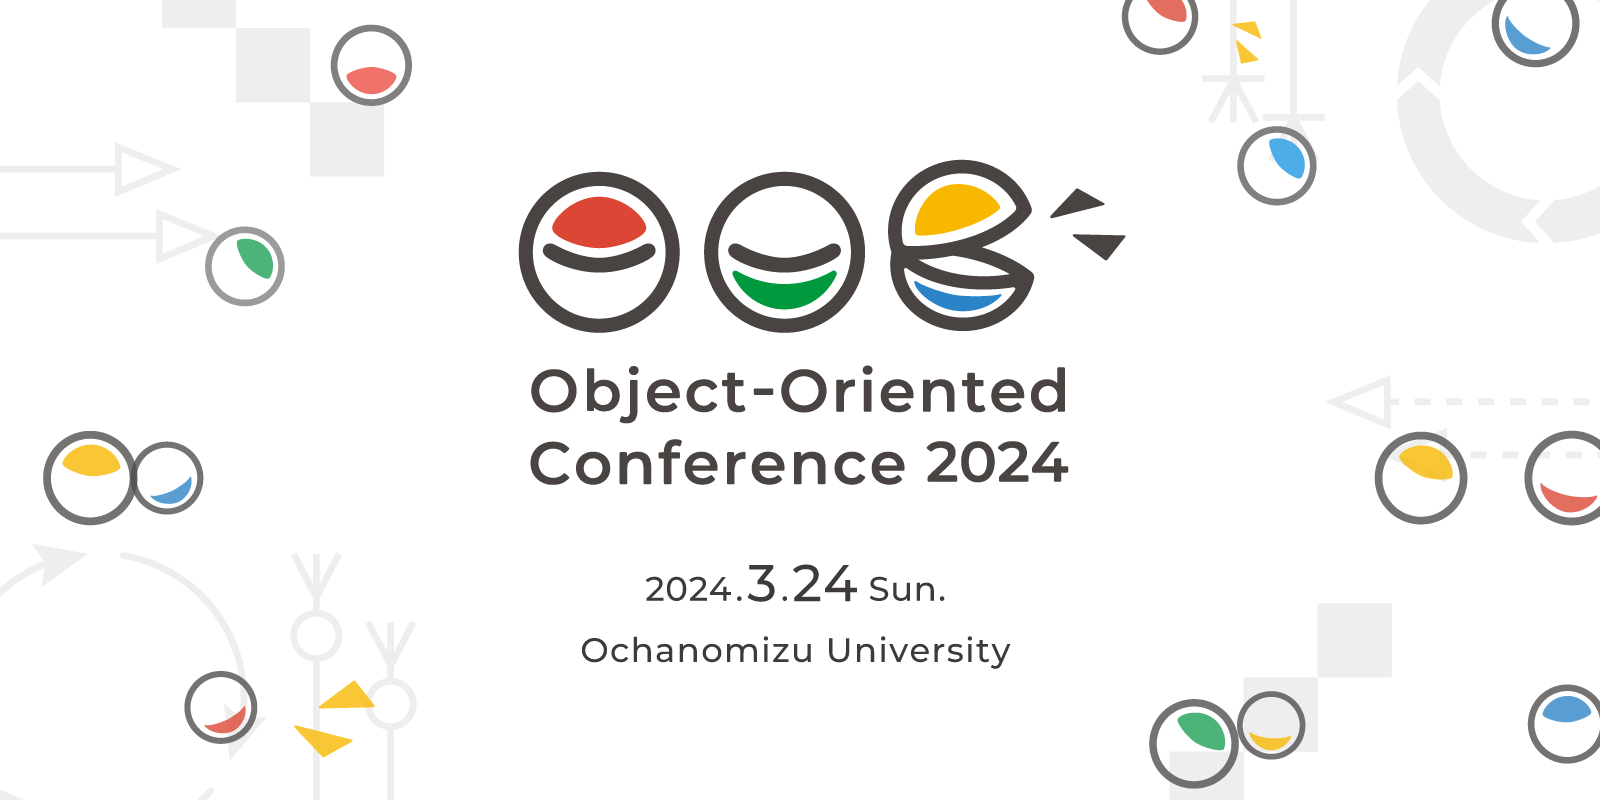 Object-Oriented Conference 2024